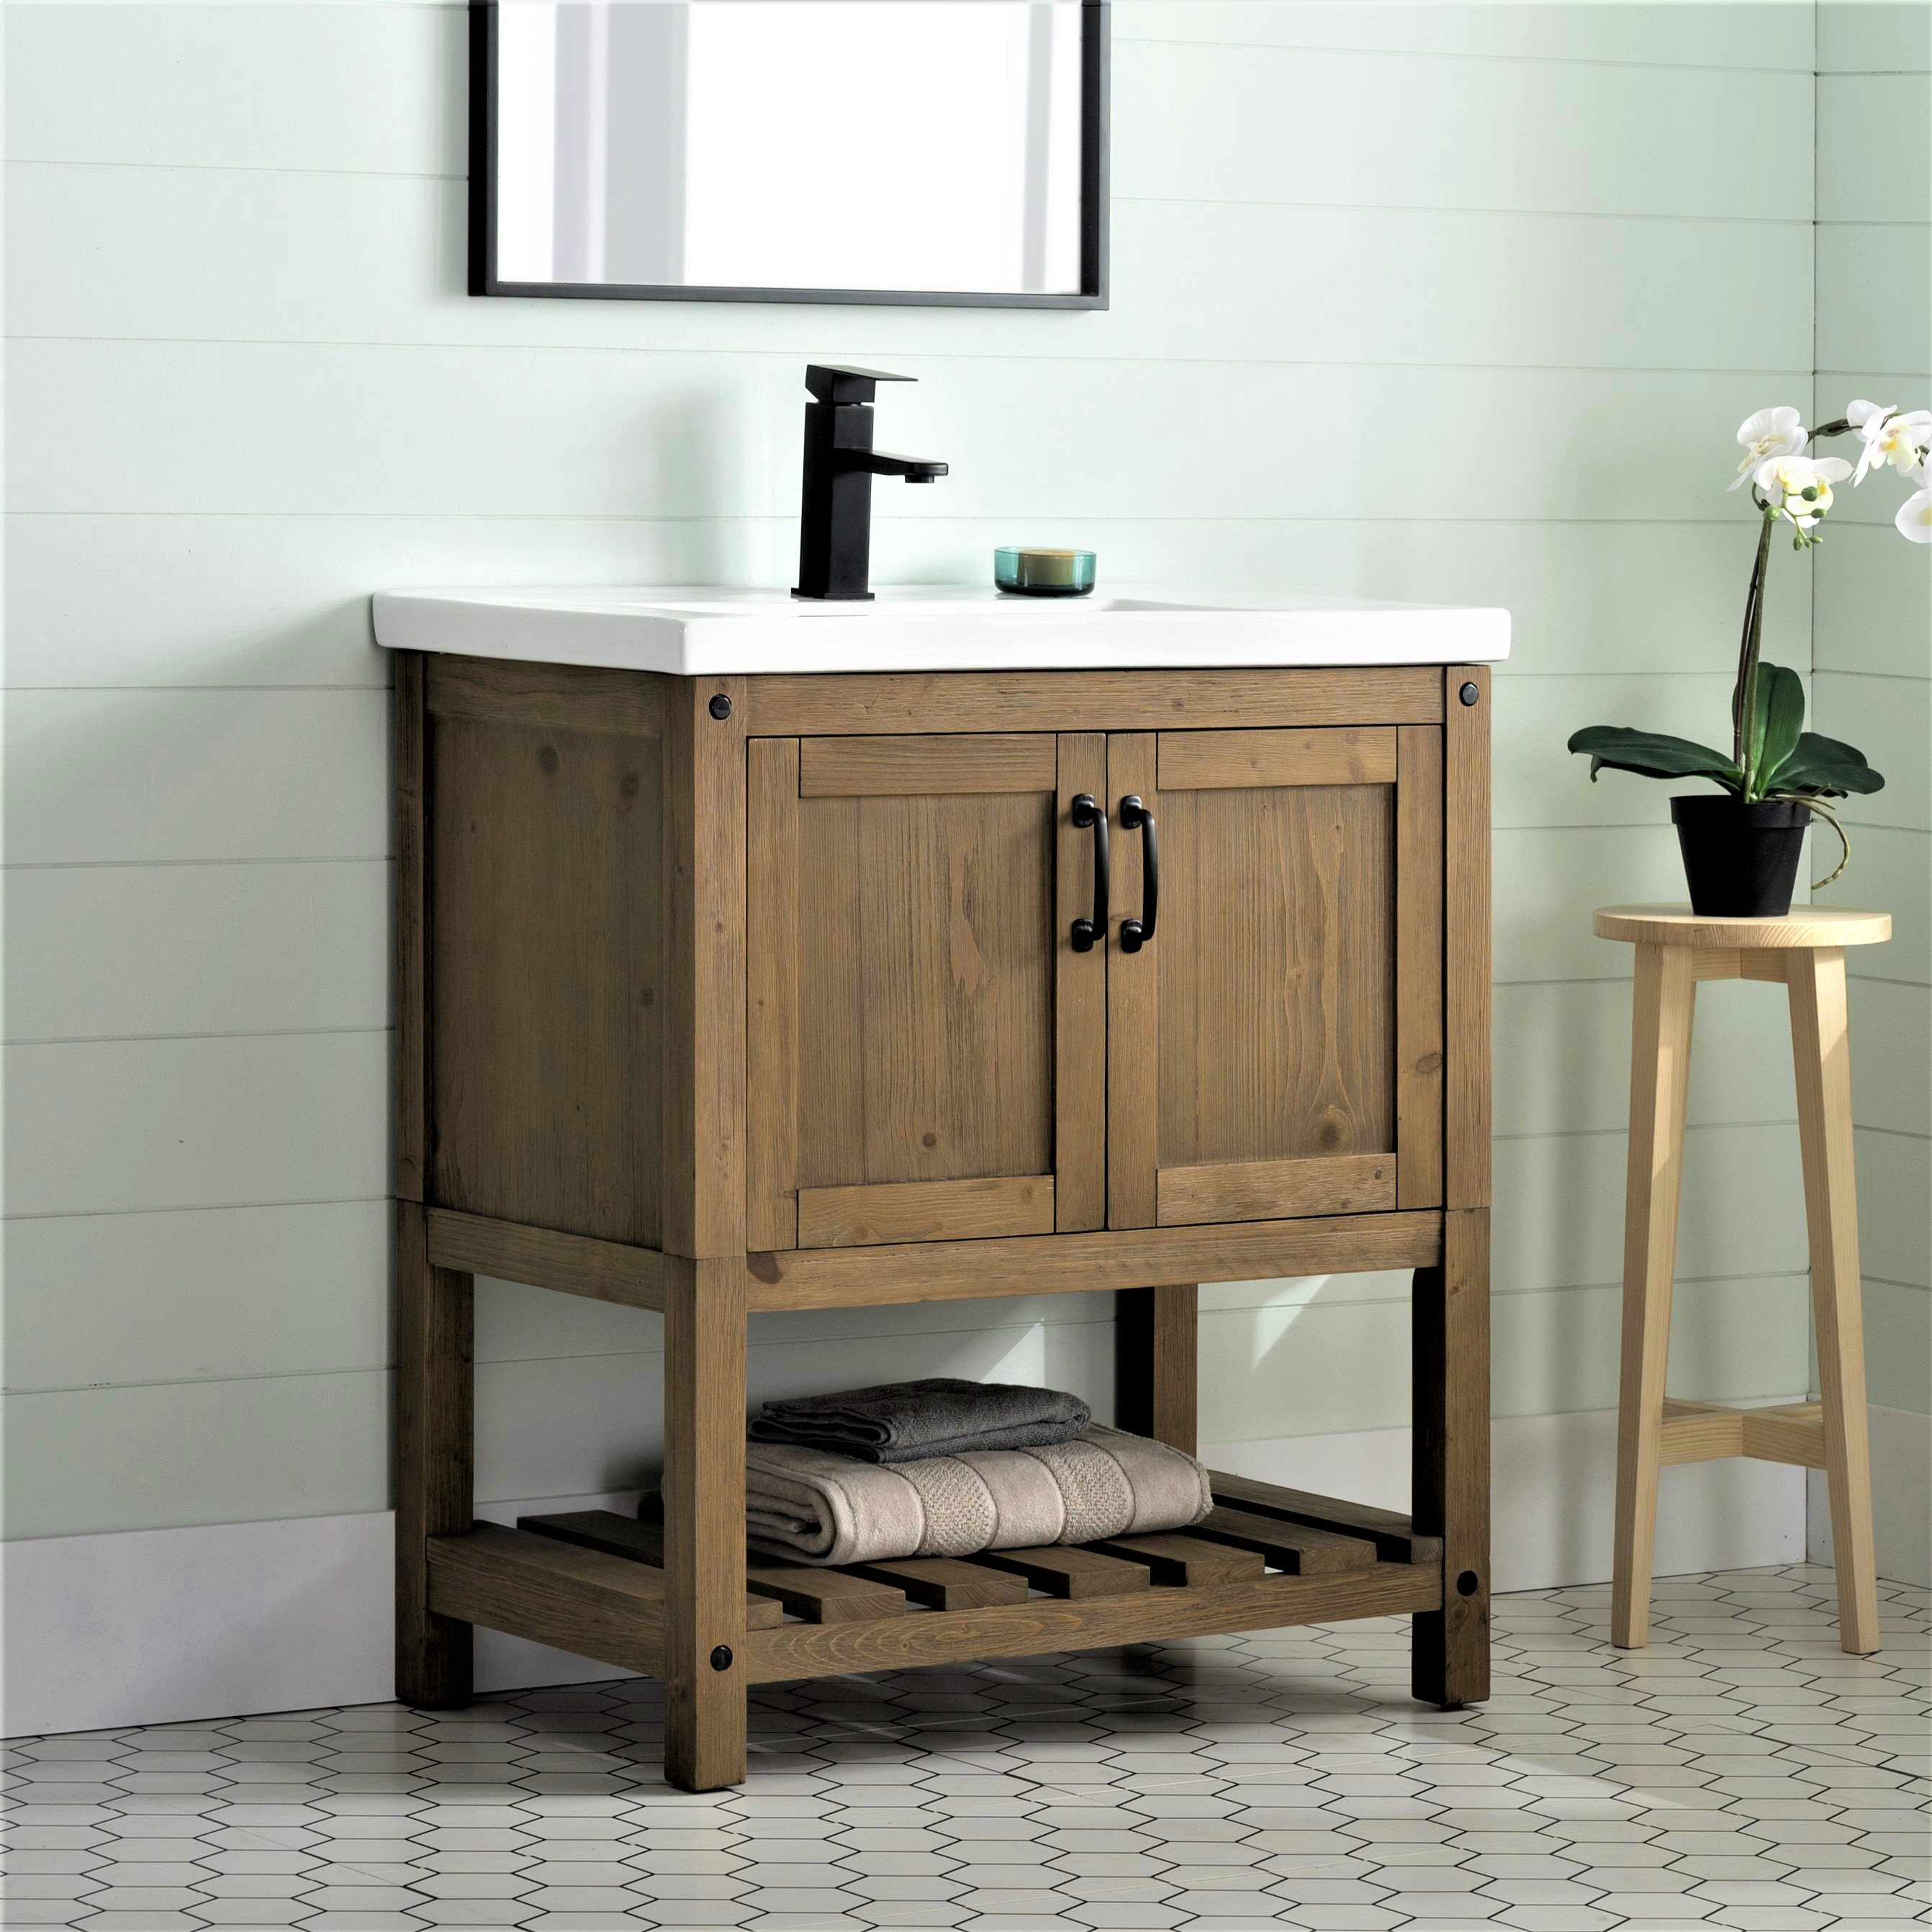 FREE SHIPPING*Style Selections Vanity Storage Bathroom Cabinet